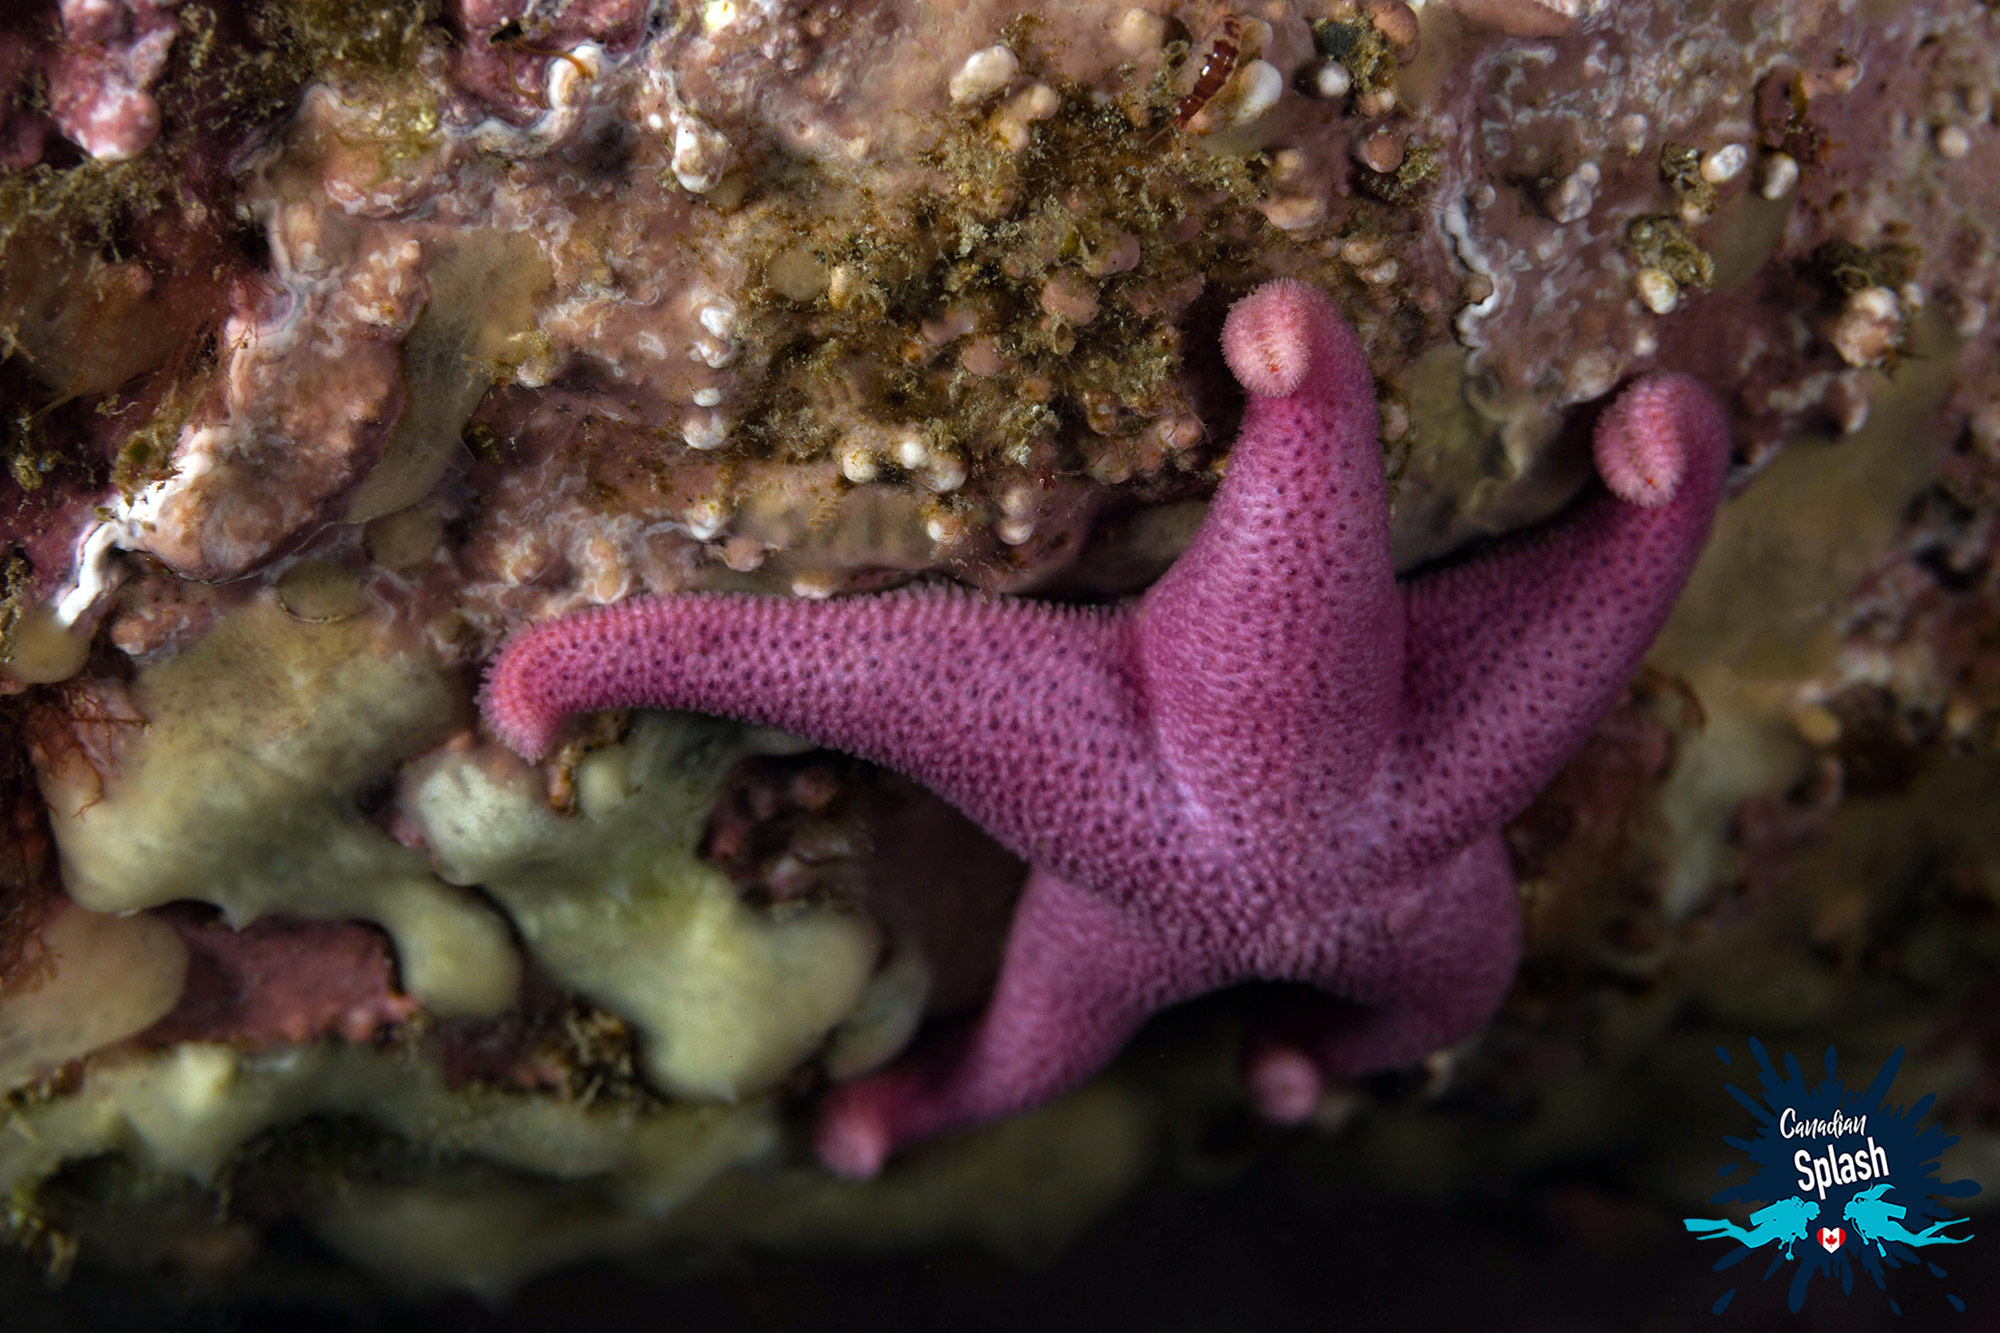 A Purple Sea Star Clinging To The Rock Face Of Deer Island, New Brunswick Scuba Diving, Canada